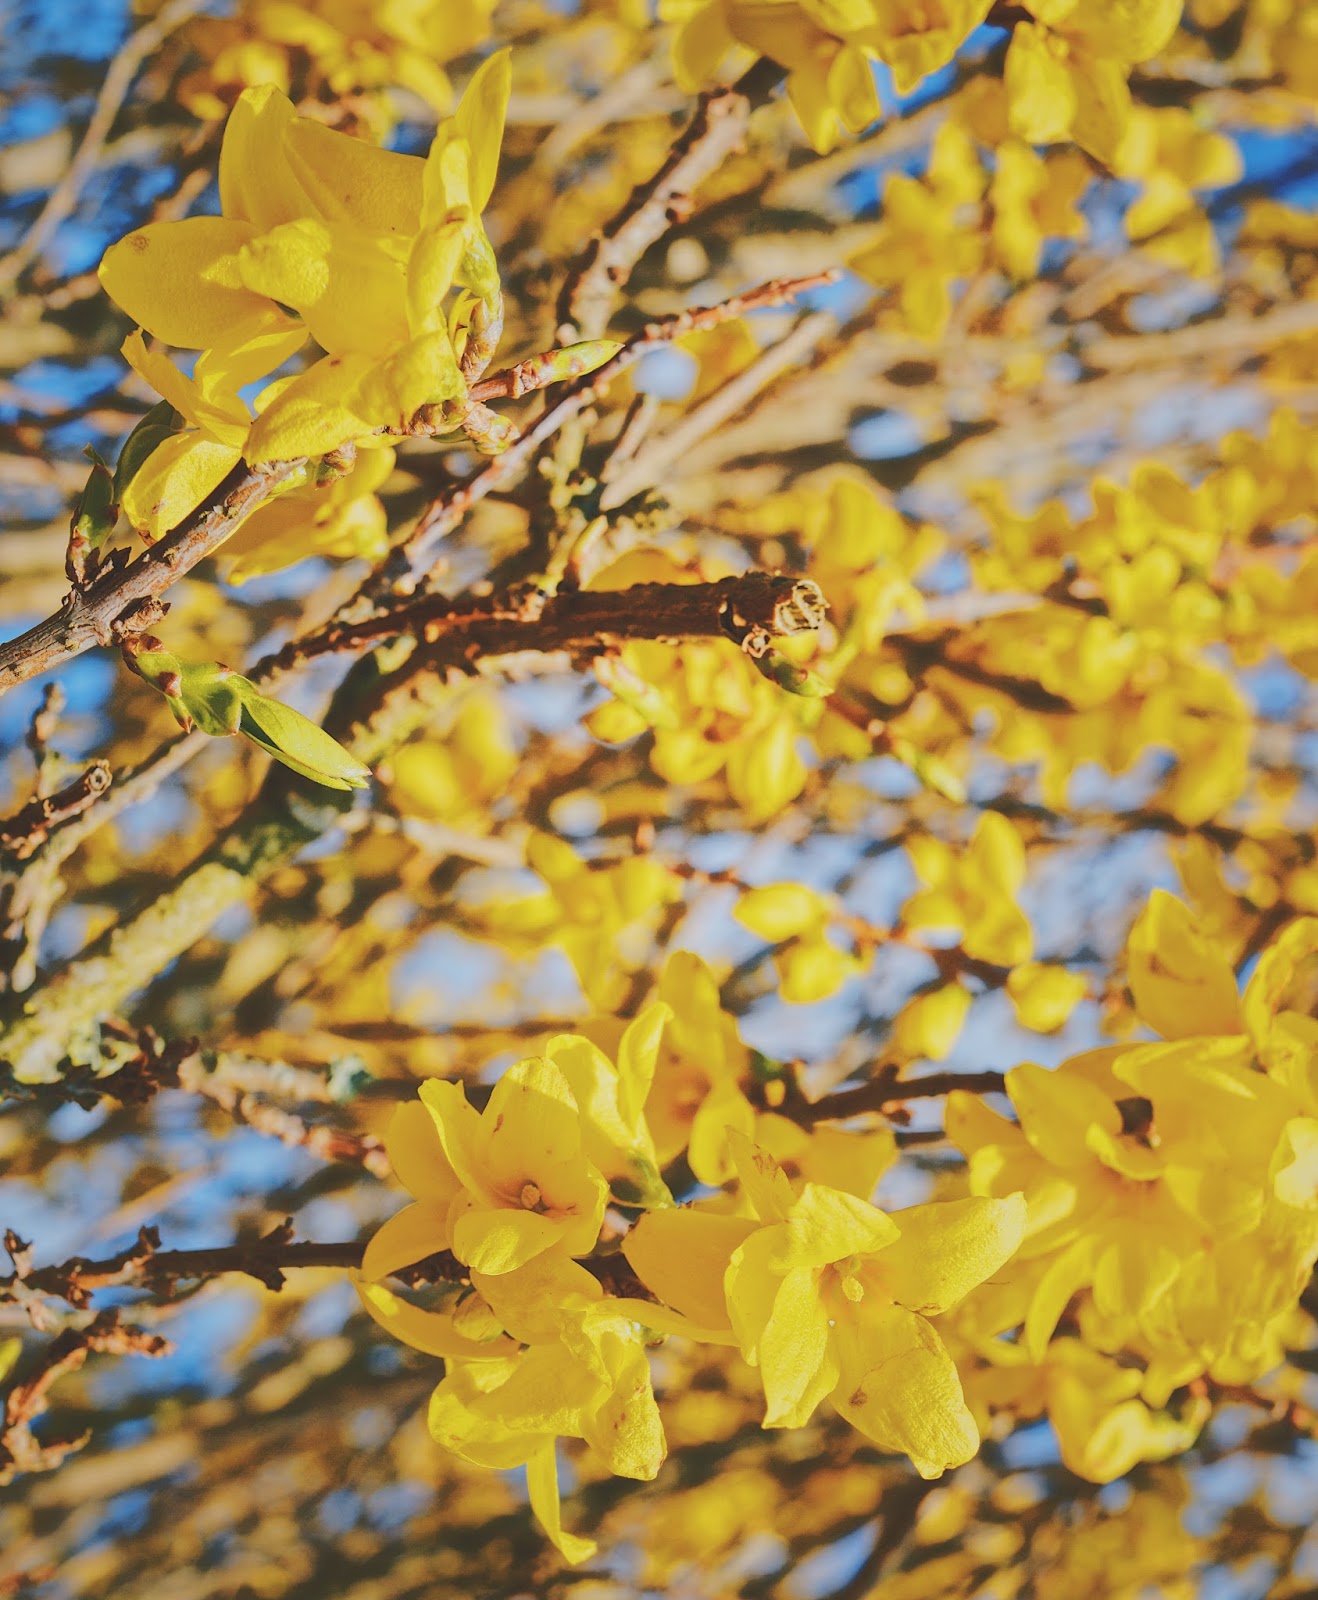 yellow flowers on a tree